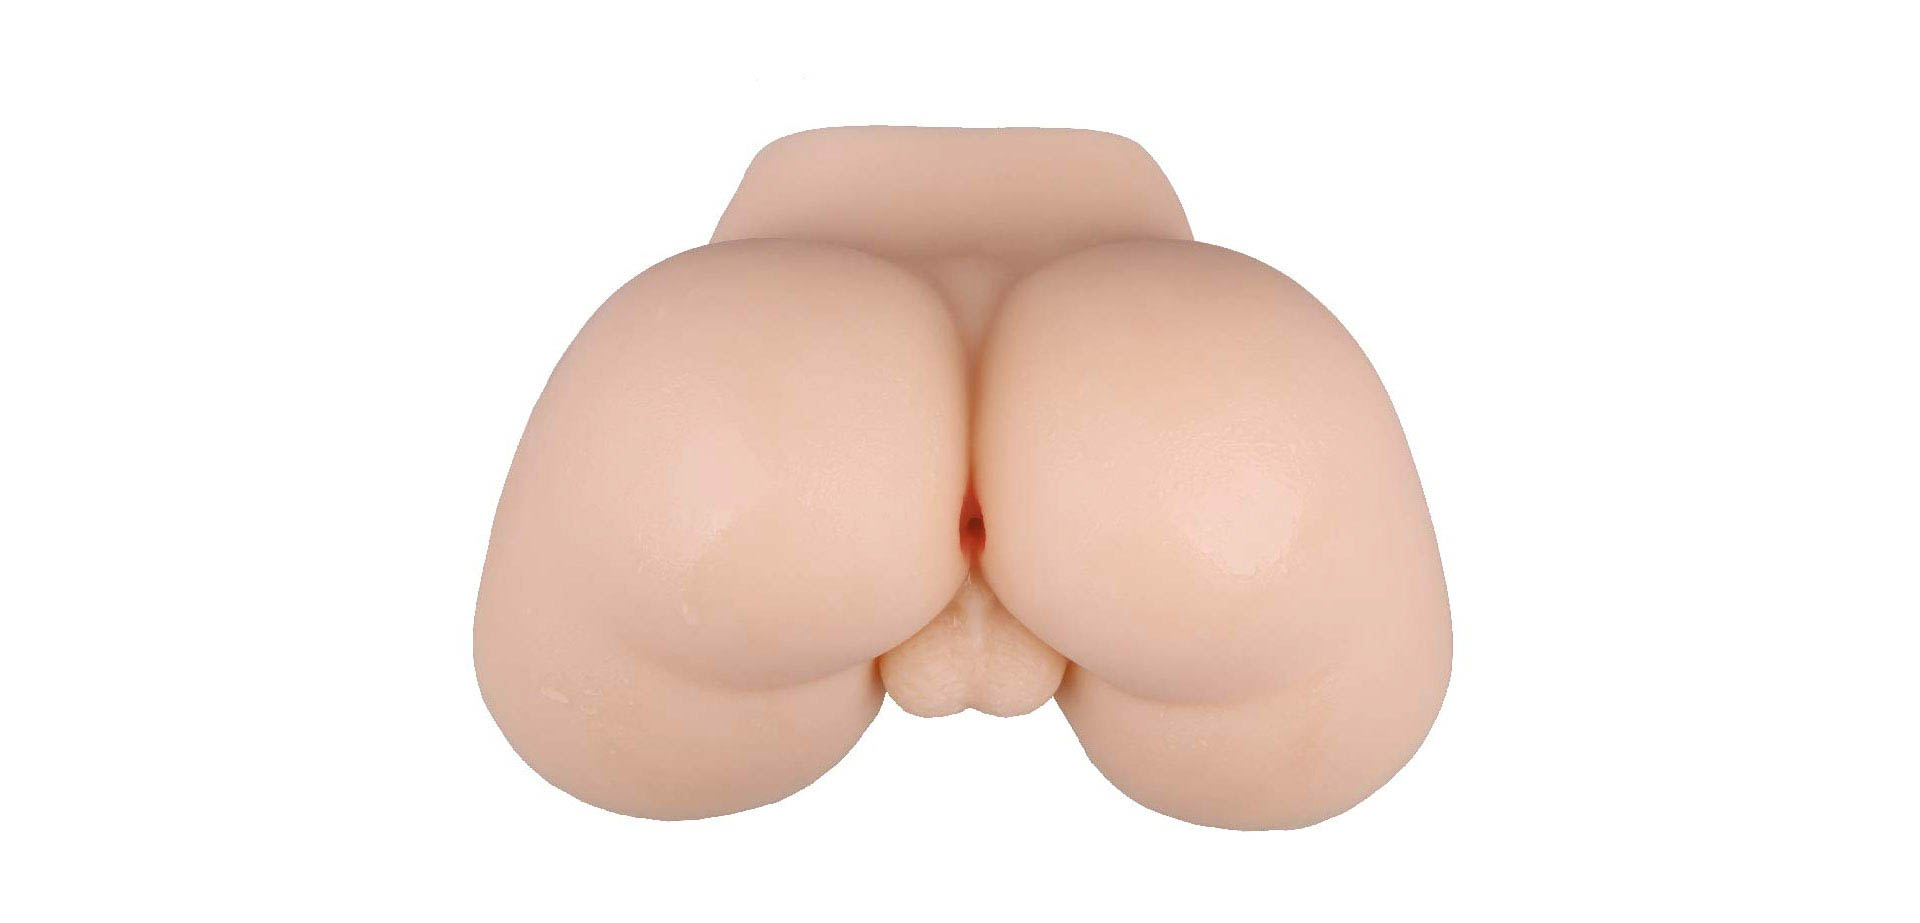 Sex Toy with Male Ass with Testis.